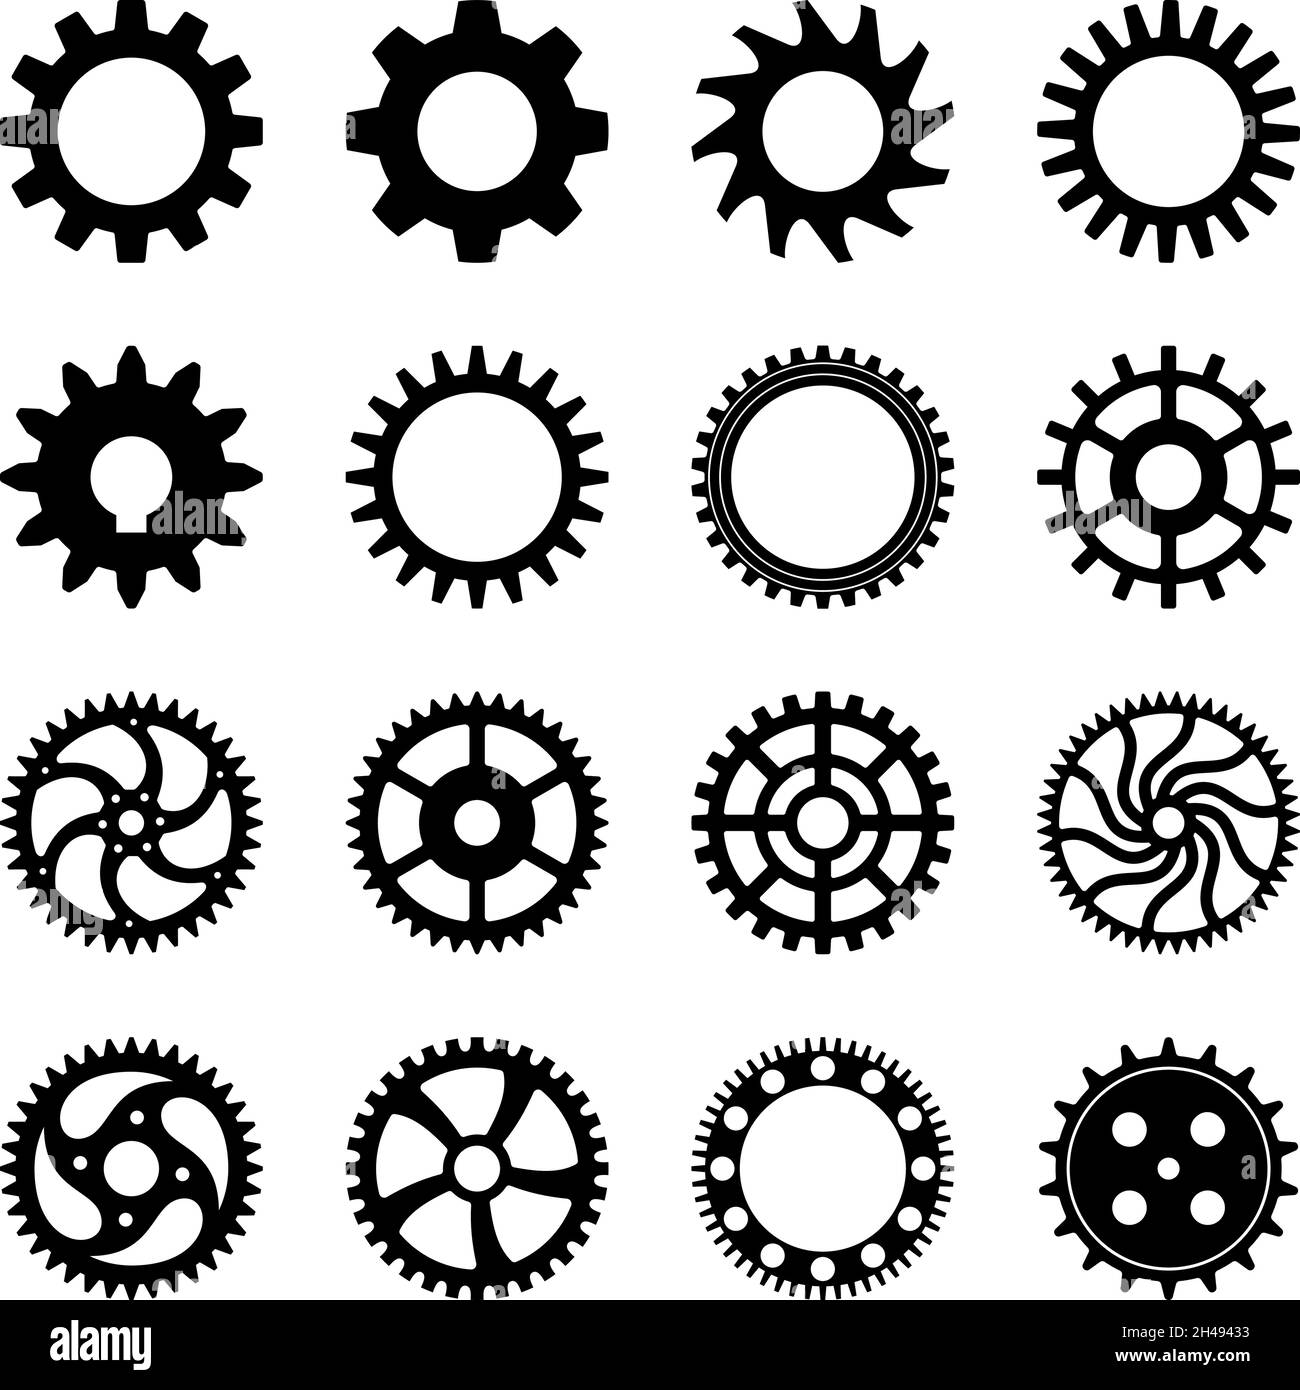 Gear or cogwheel set on isolated white background. Collection of different Types of rack wheels in black. Stock Vector